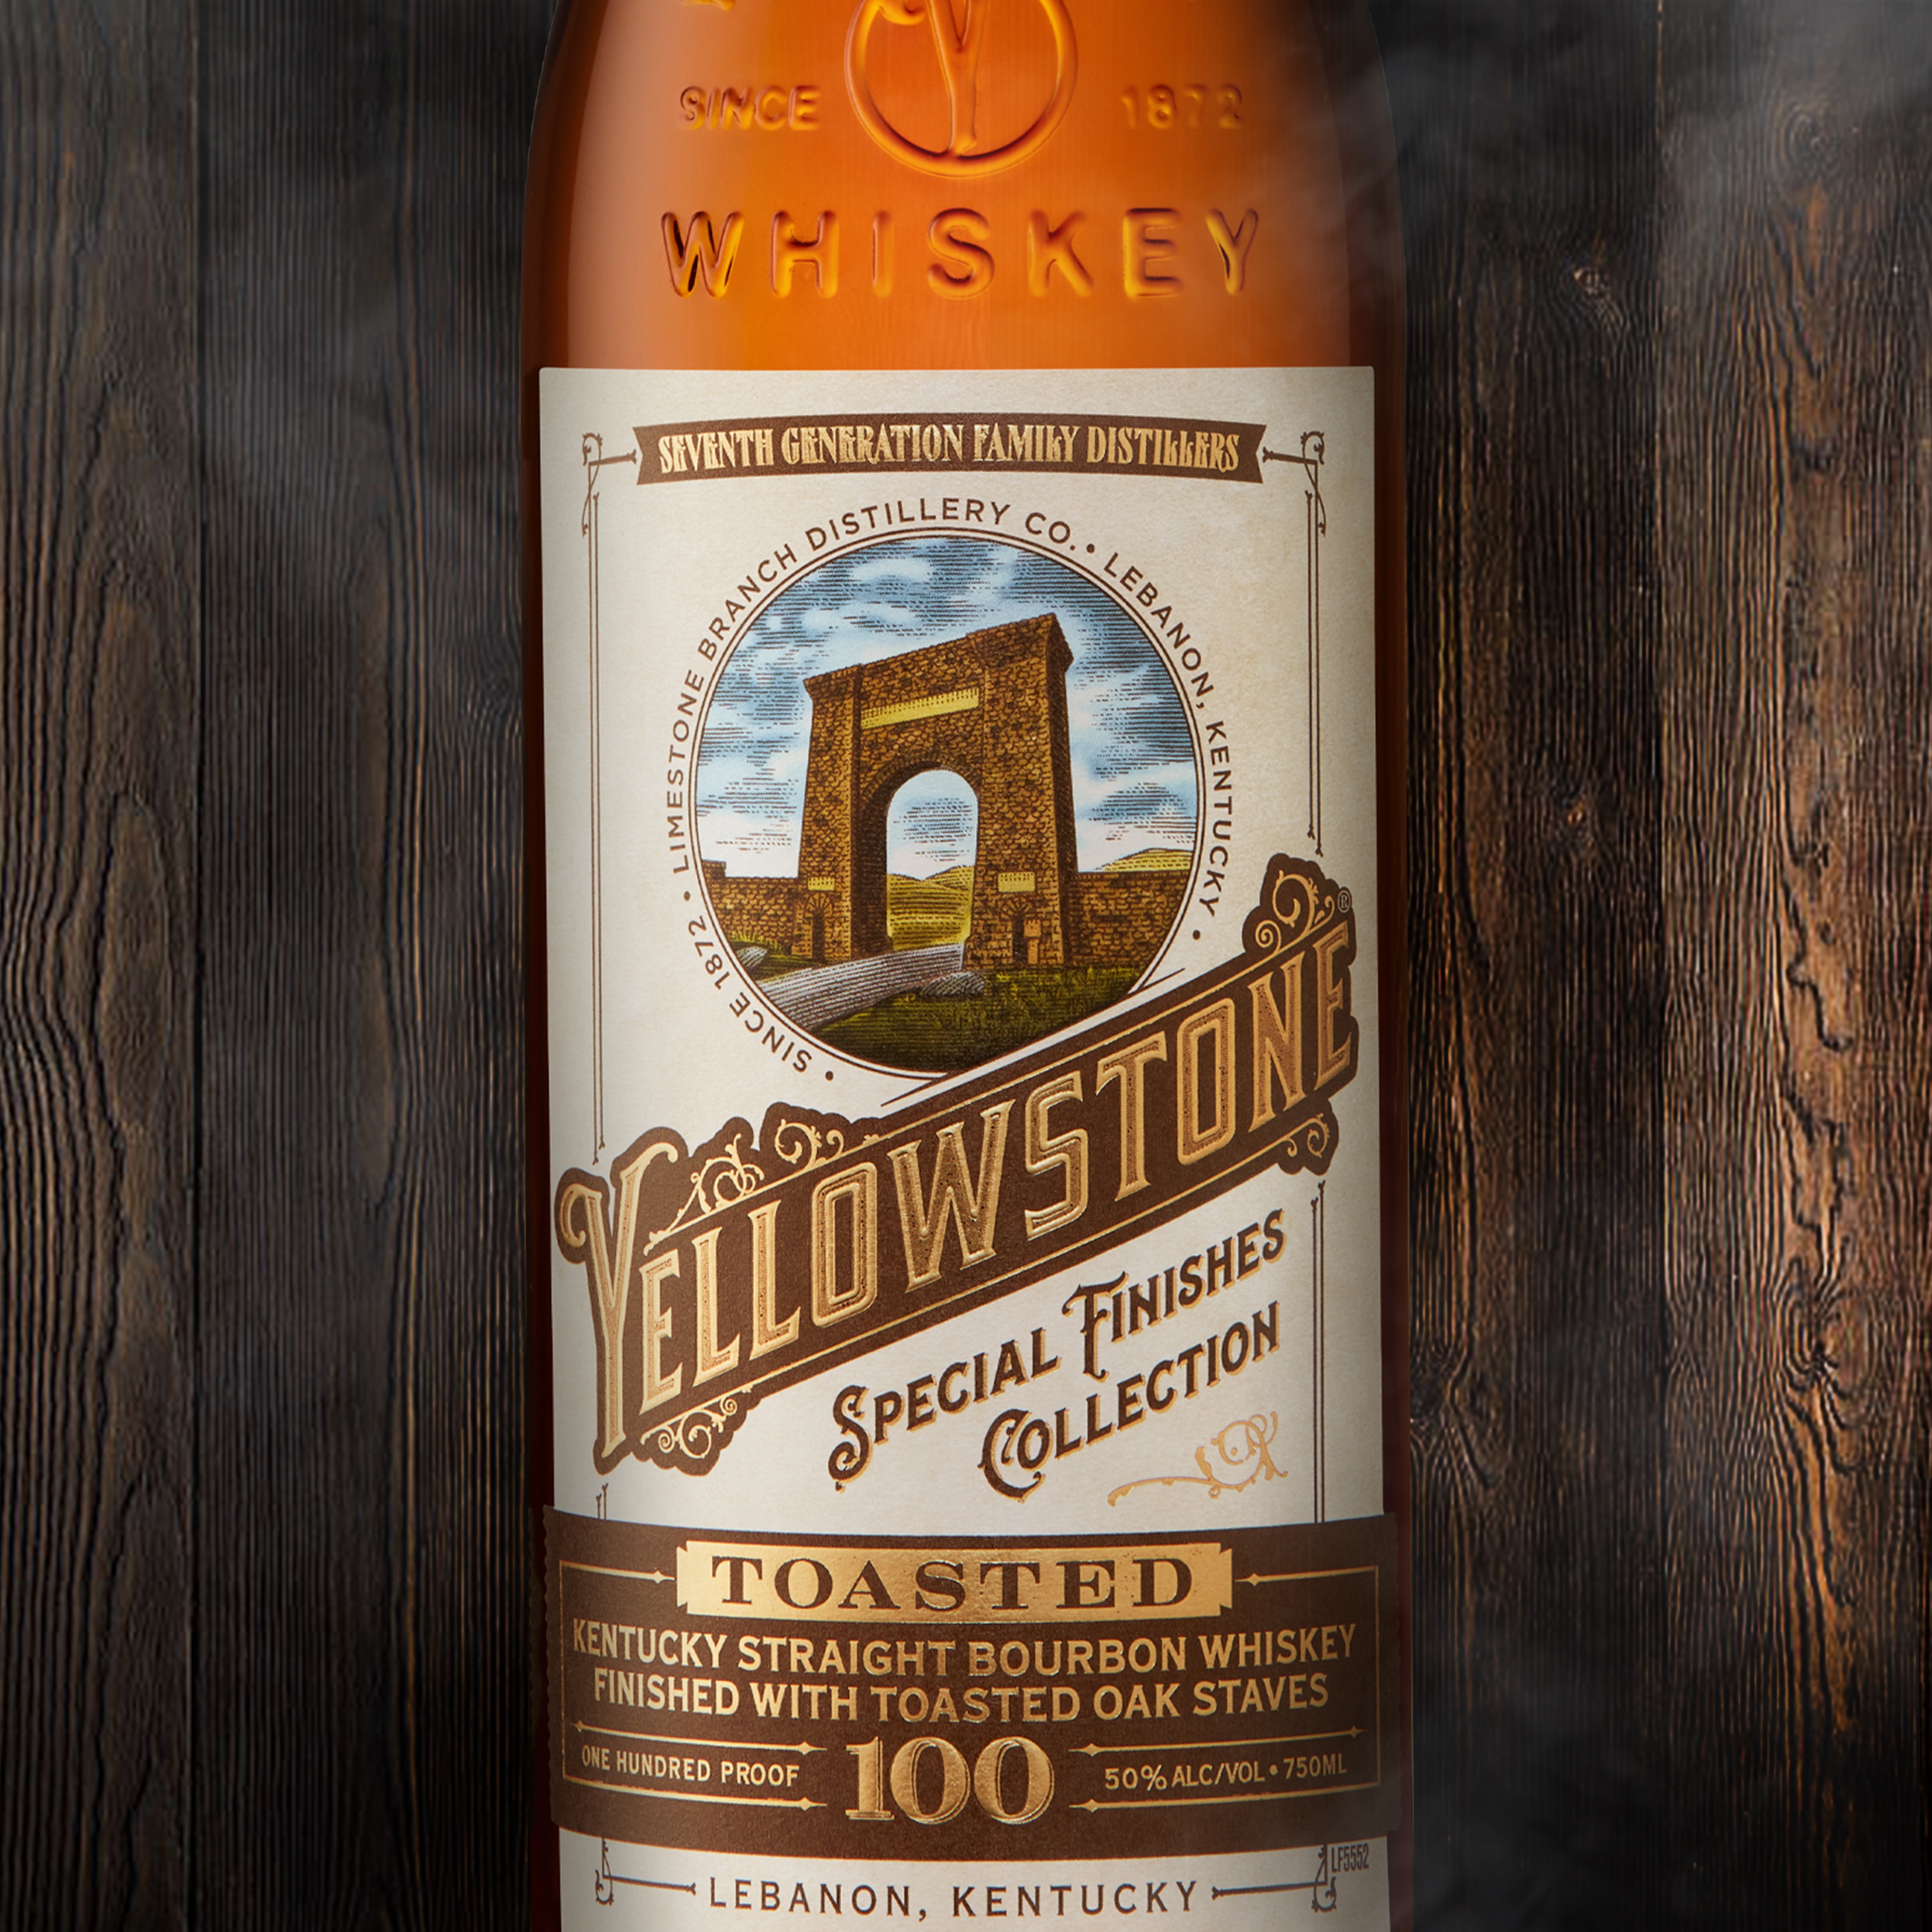 Yellowstone Toasted Barrel Bourbon with staves in the background